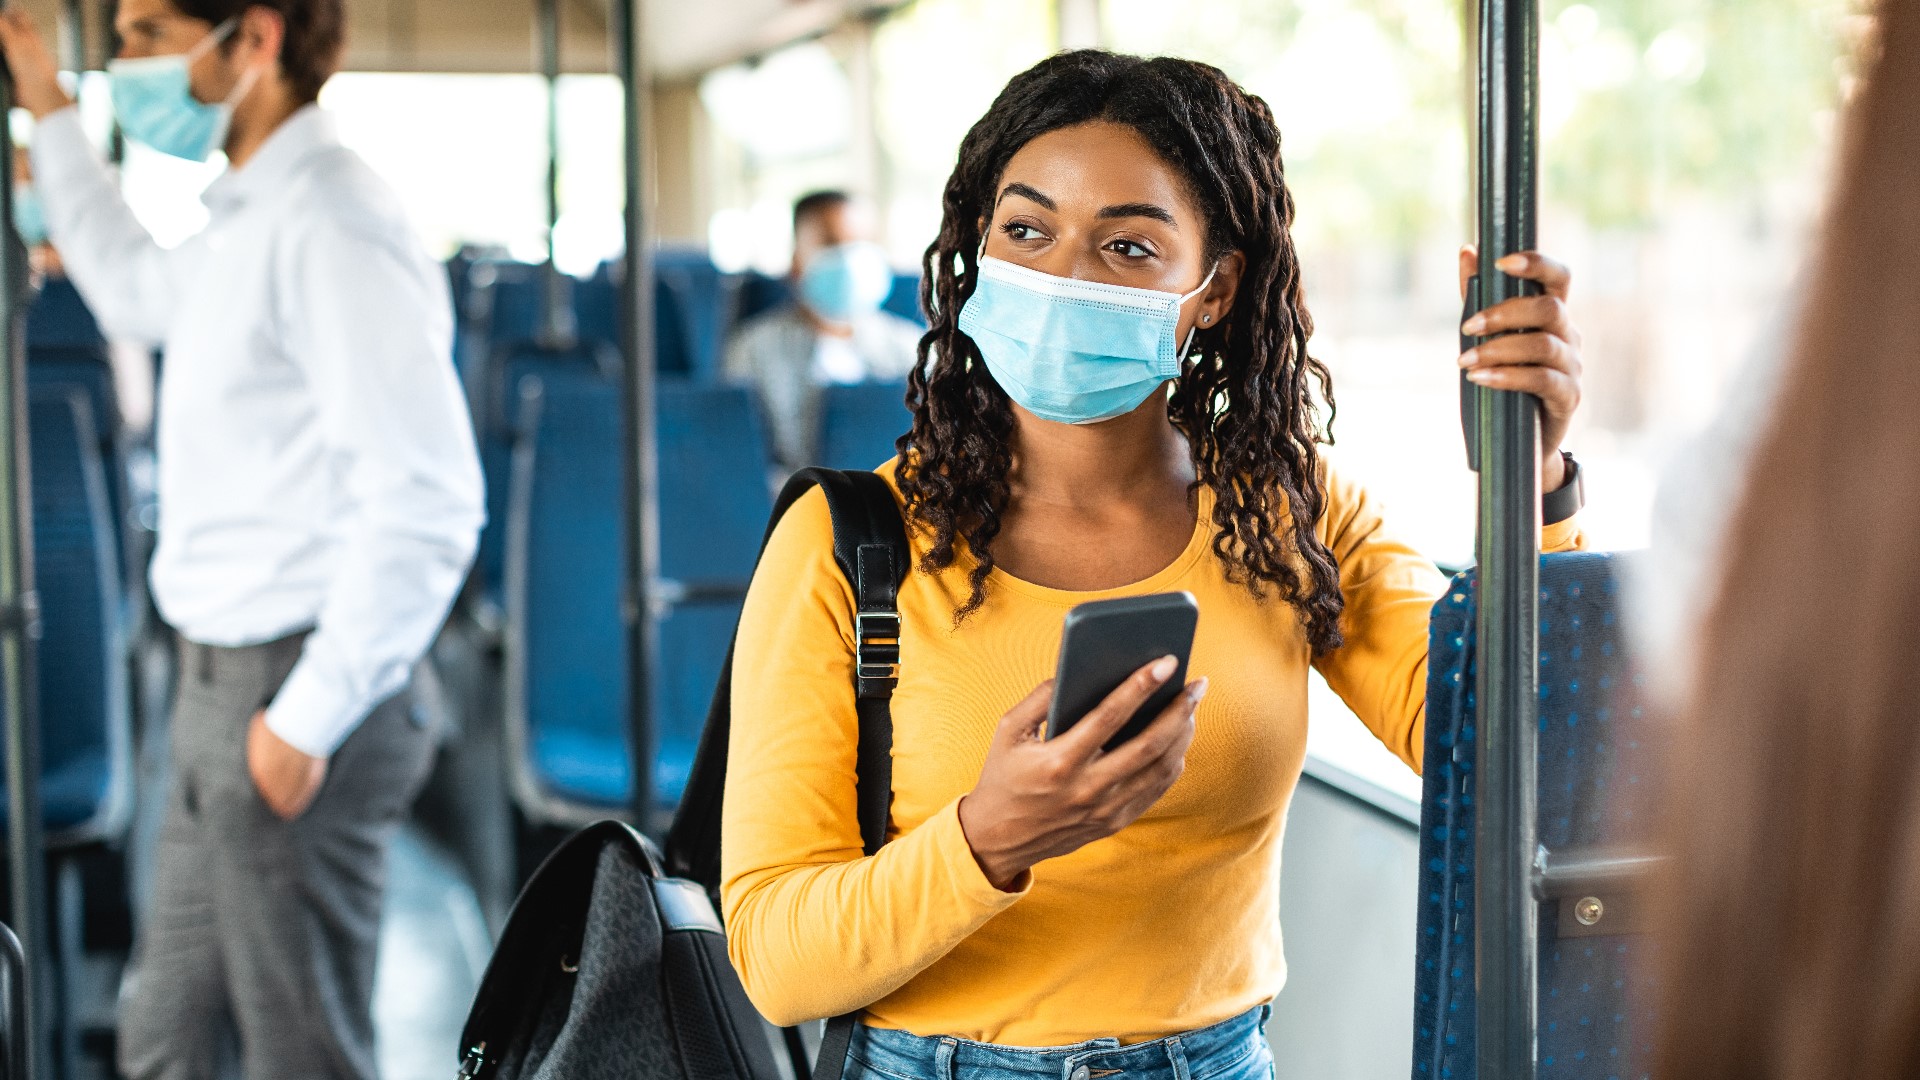 Masks won't be required in most places starting March 12. However, federal requirements state they'll still be mandated on public transit and health care facilities.